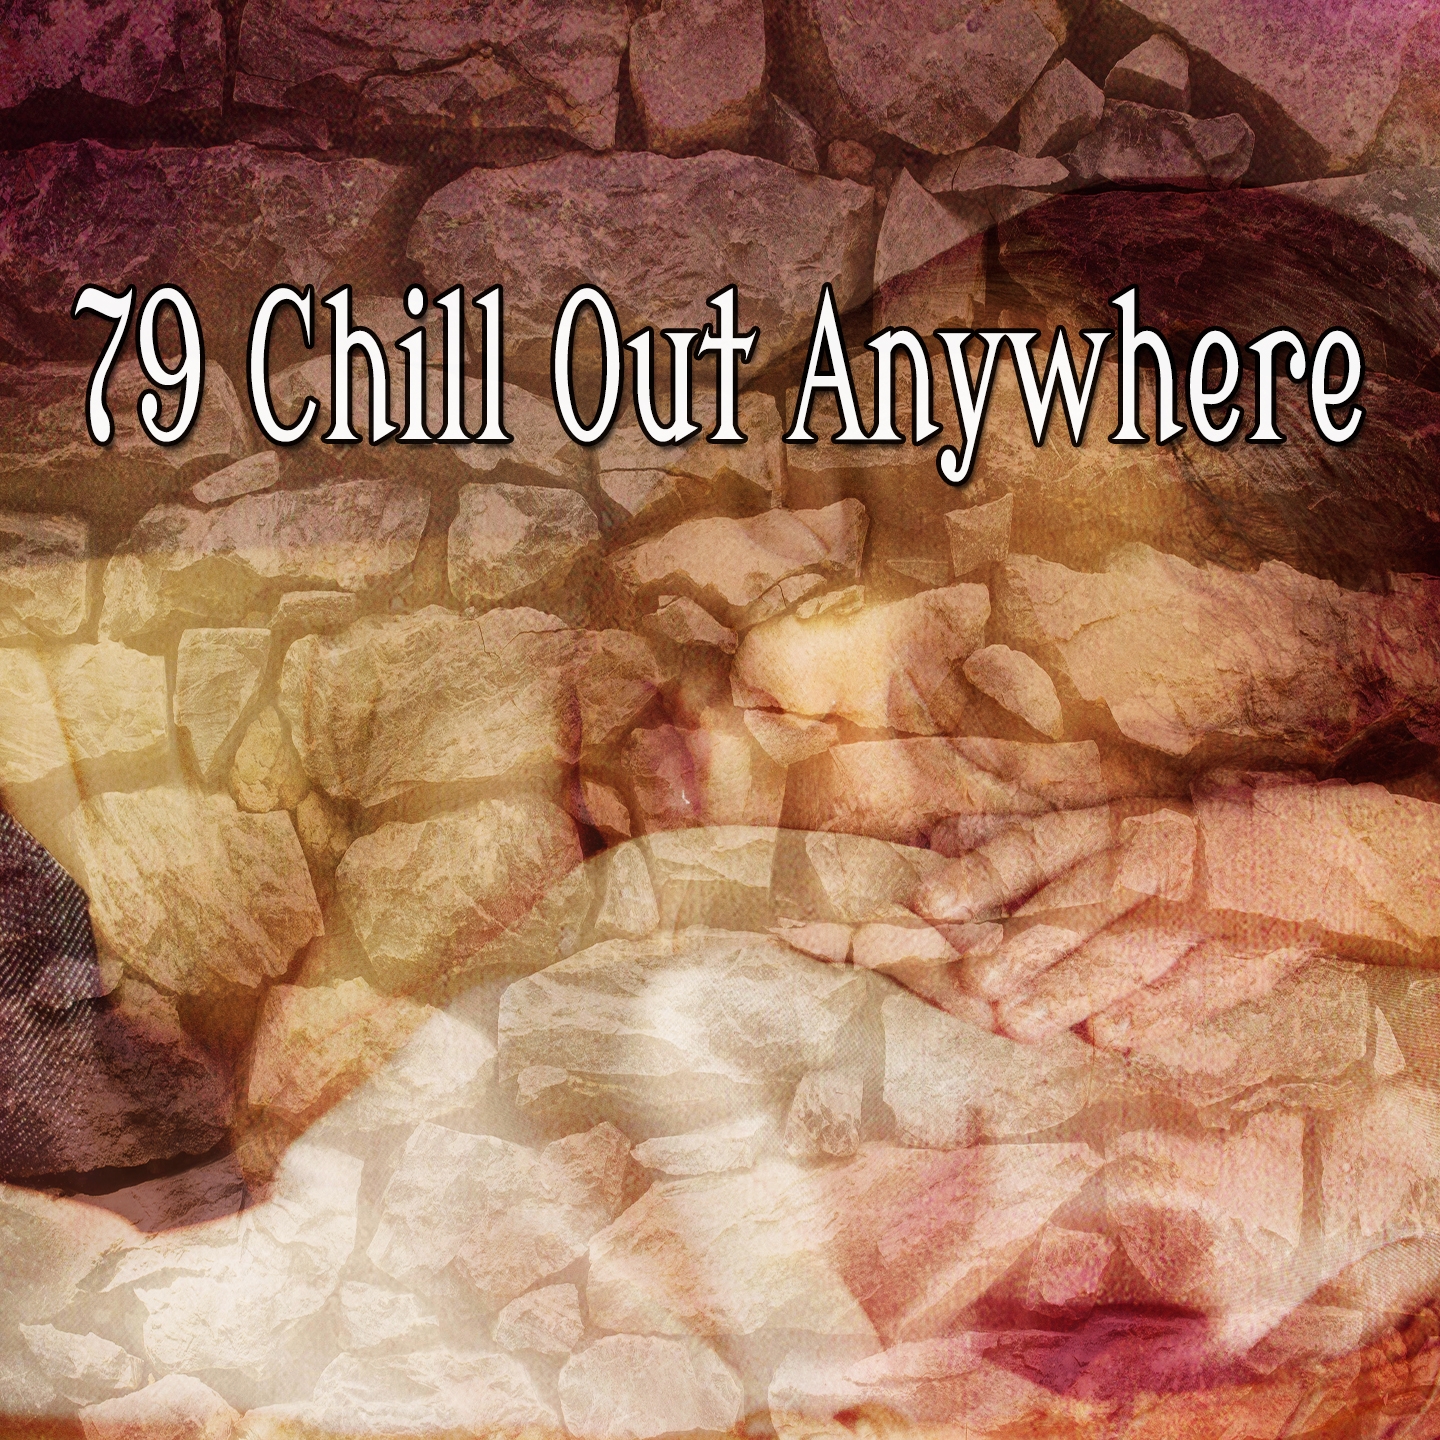 79 Chill Out Anywhere